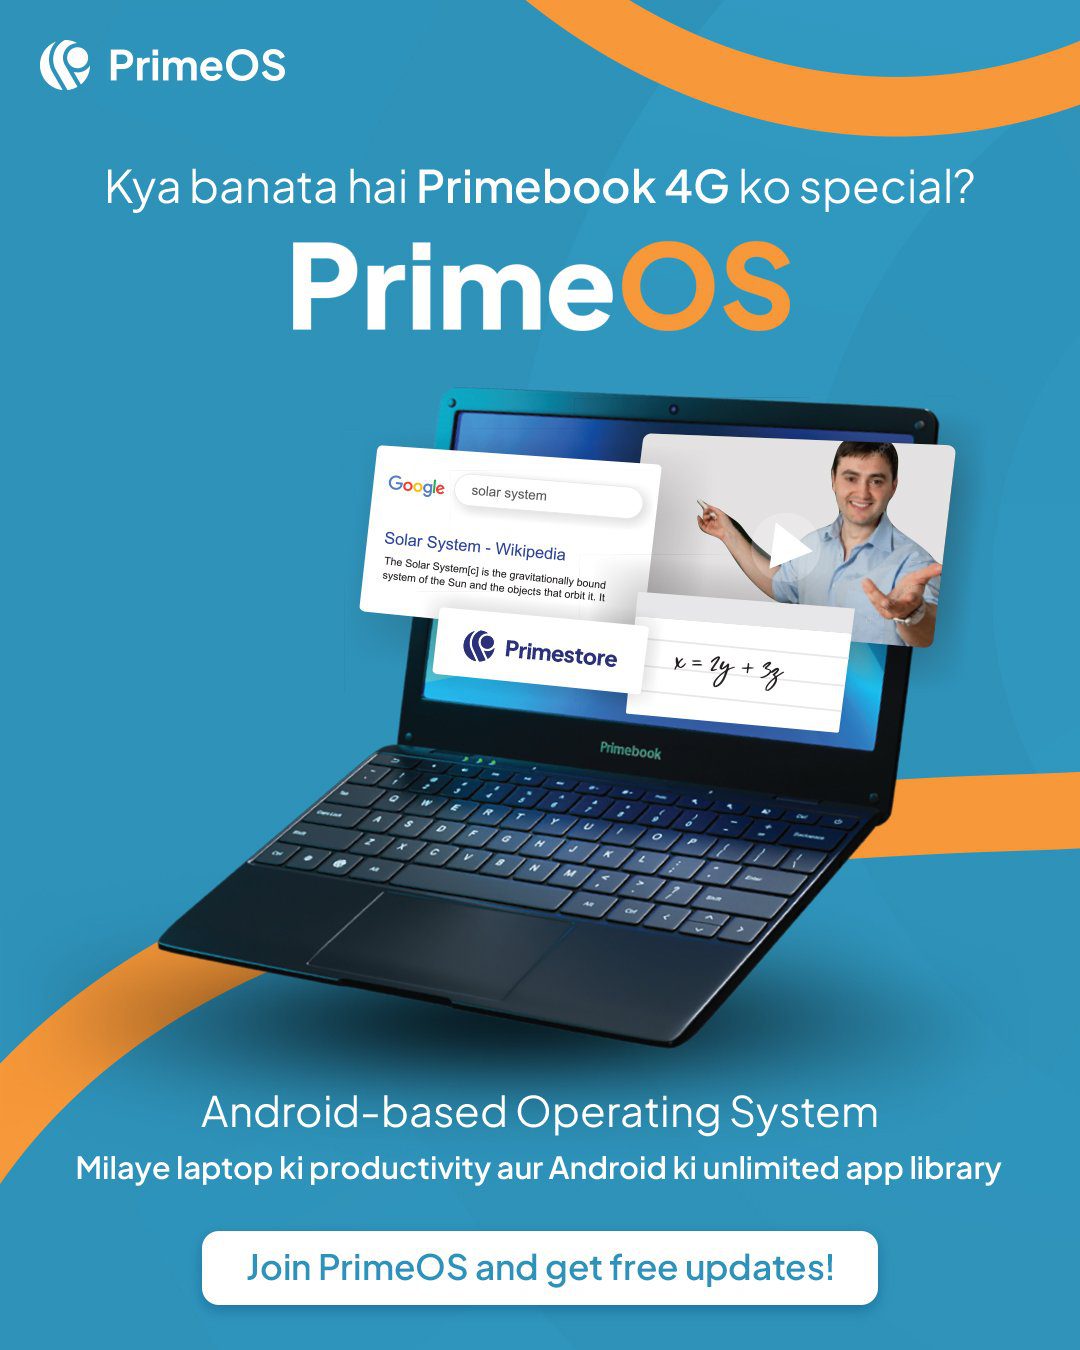 FpFkOOeakAMD6WT Made-in-India Primebook 4G launching for students in March